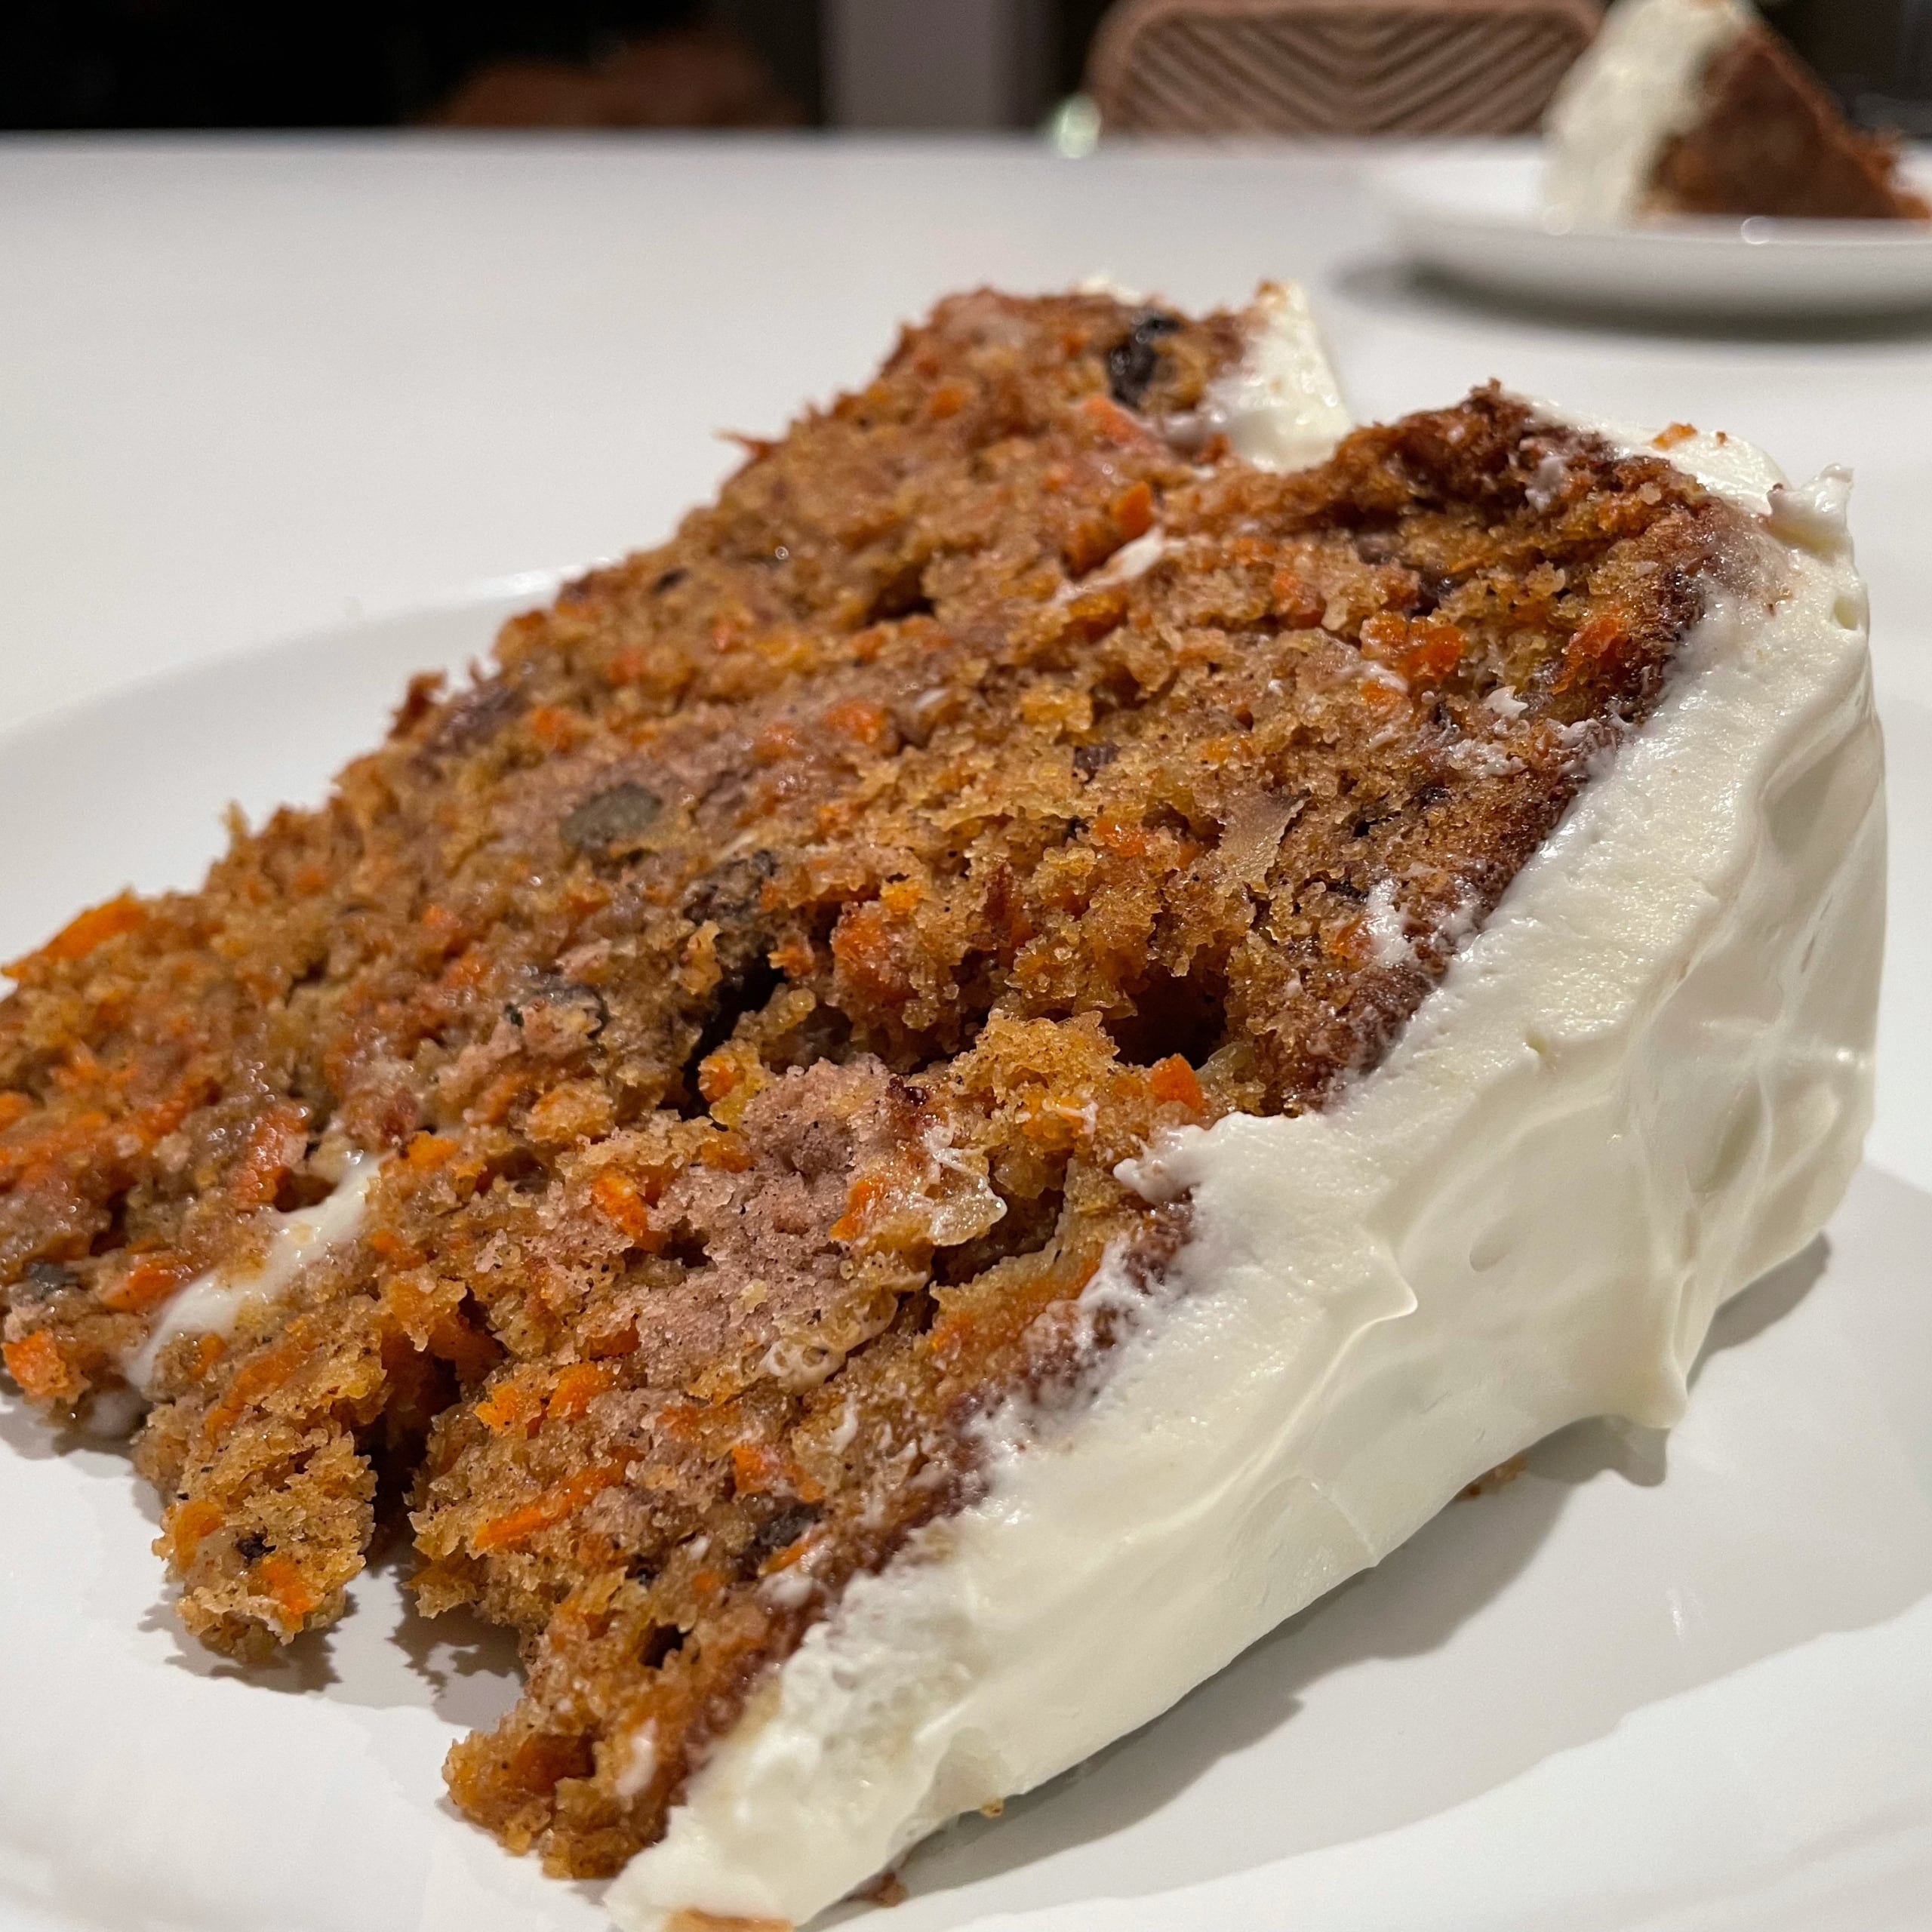 Brandy's Carrot Cake | My Curated Tastes